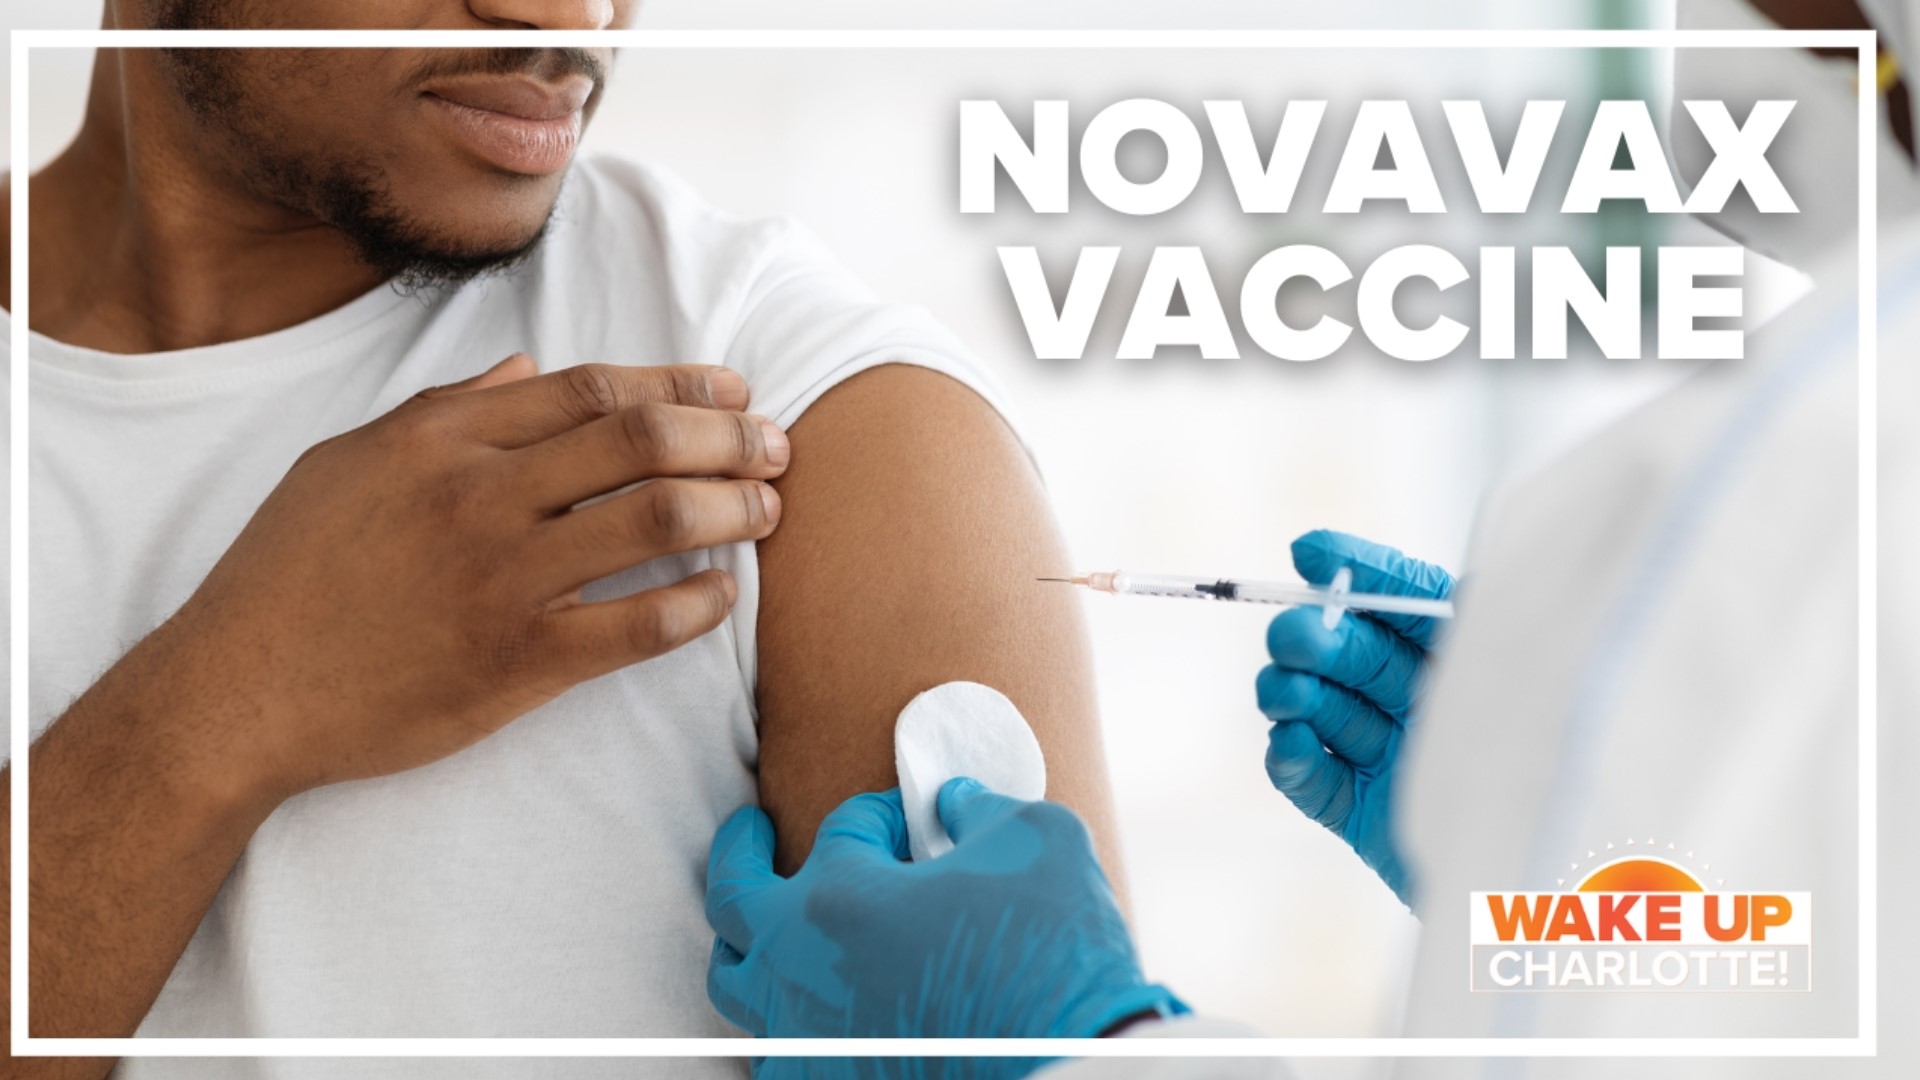 Novavax's shot is made with a more conventional technology than today's U.S. options.